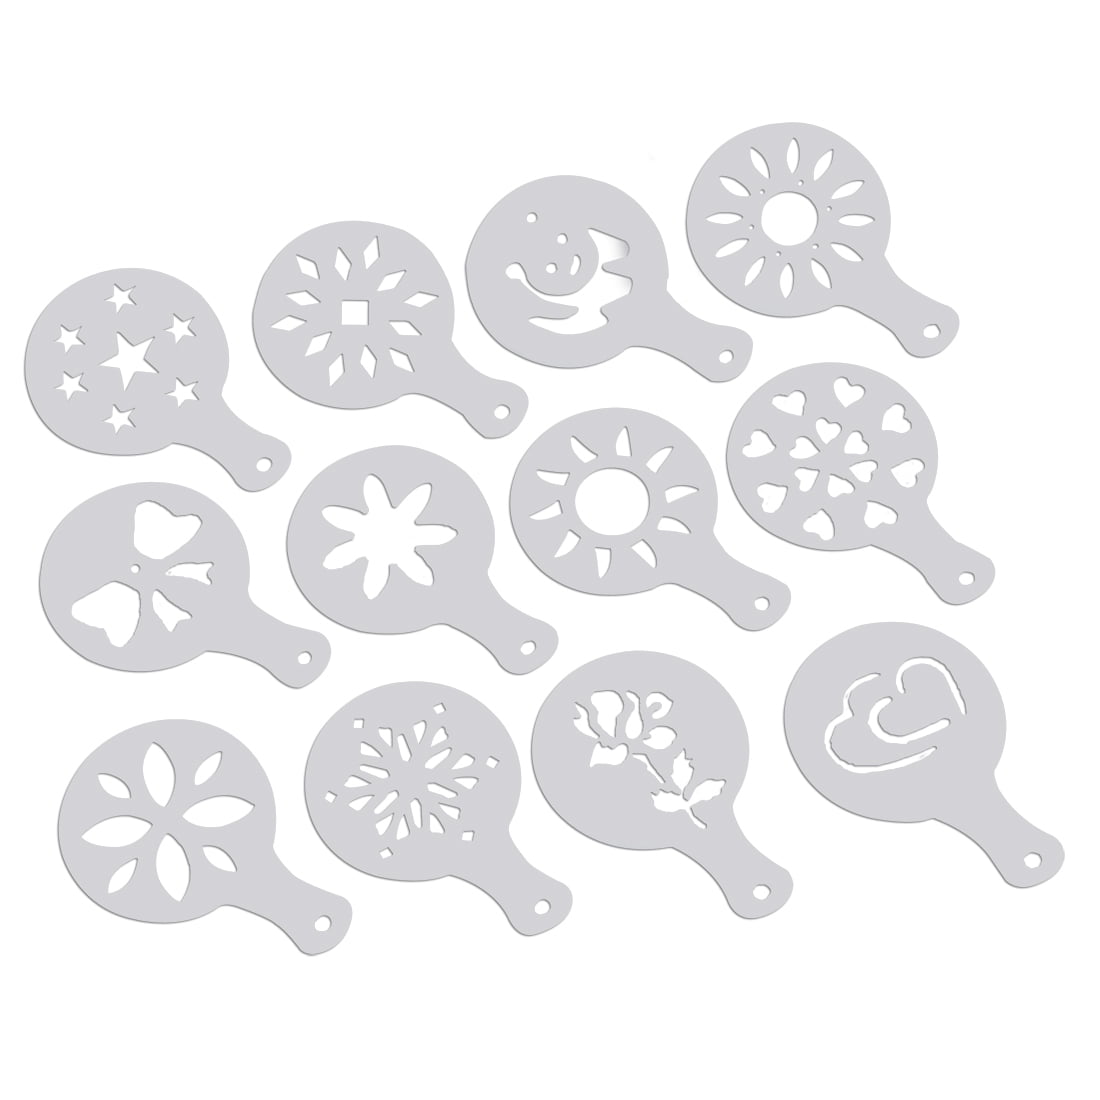 Kingken 12 Pcs Cappuccino Coffee Stencils Template Strew Flowers Pad Duster Spray White 